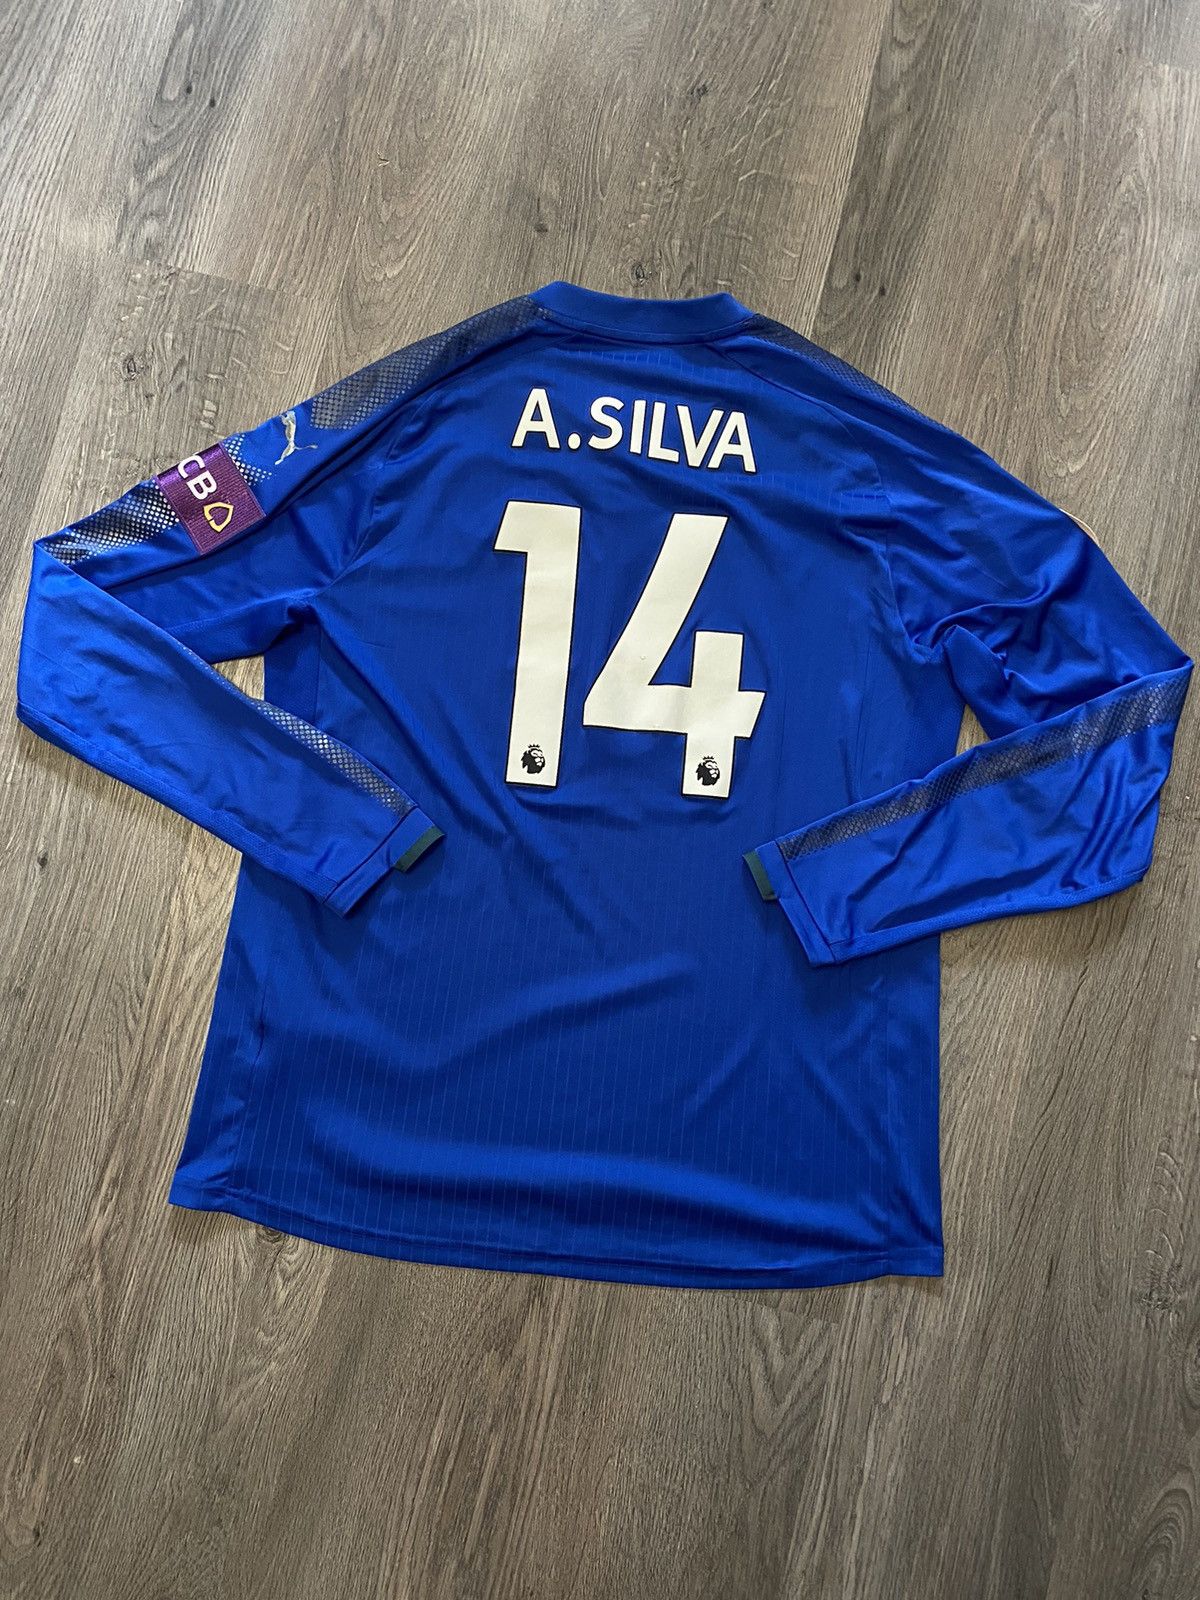 Pre-owned Jersey X Puma Leicester City 2017 2018 Silva Football Soccer Jersey In Blue